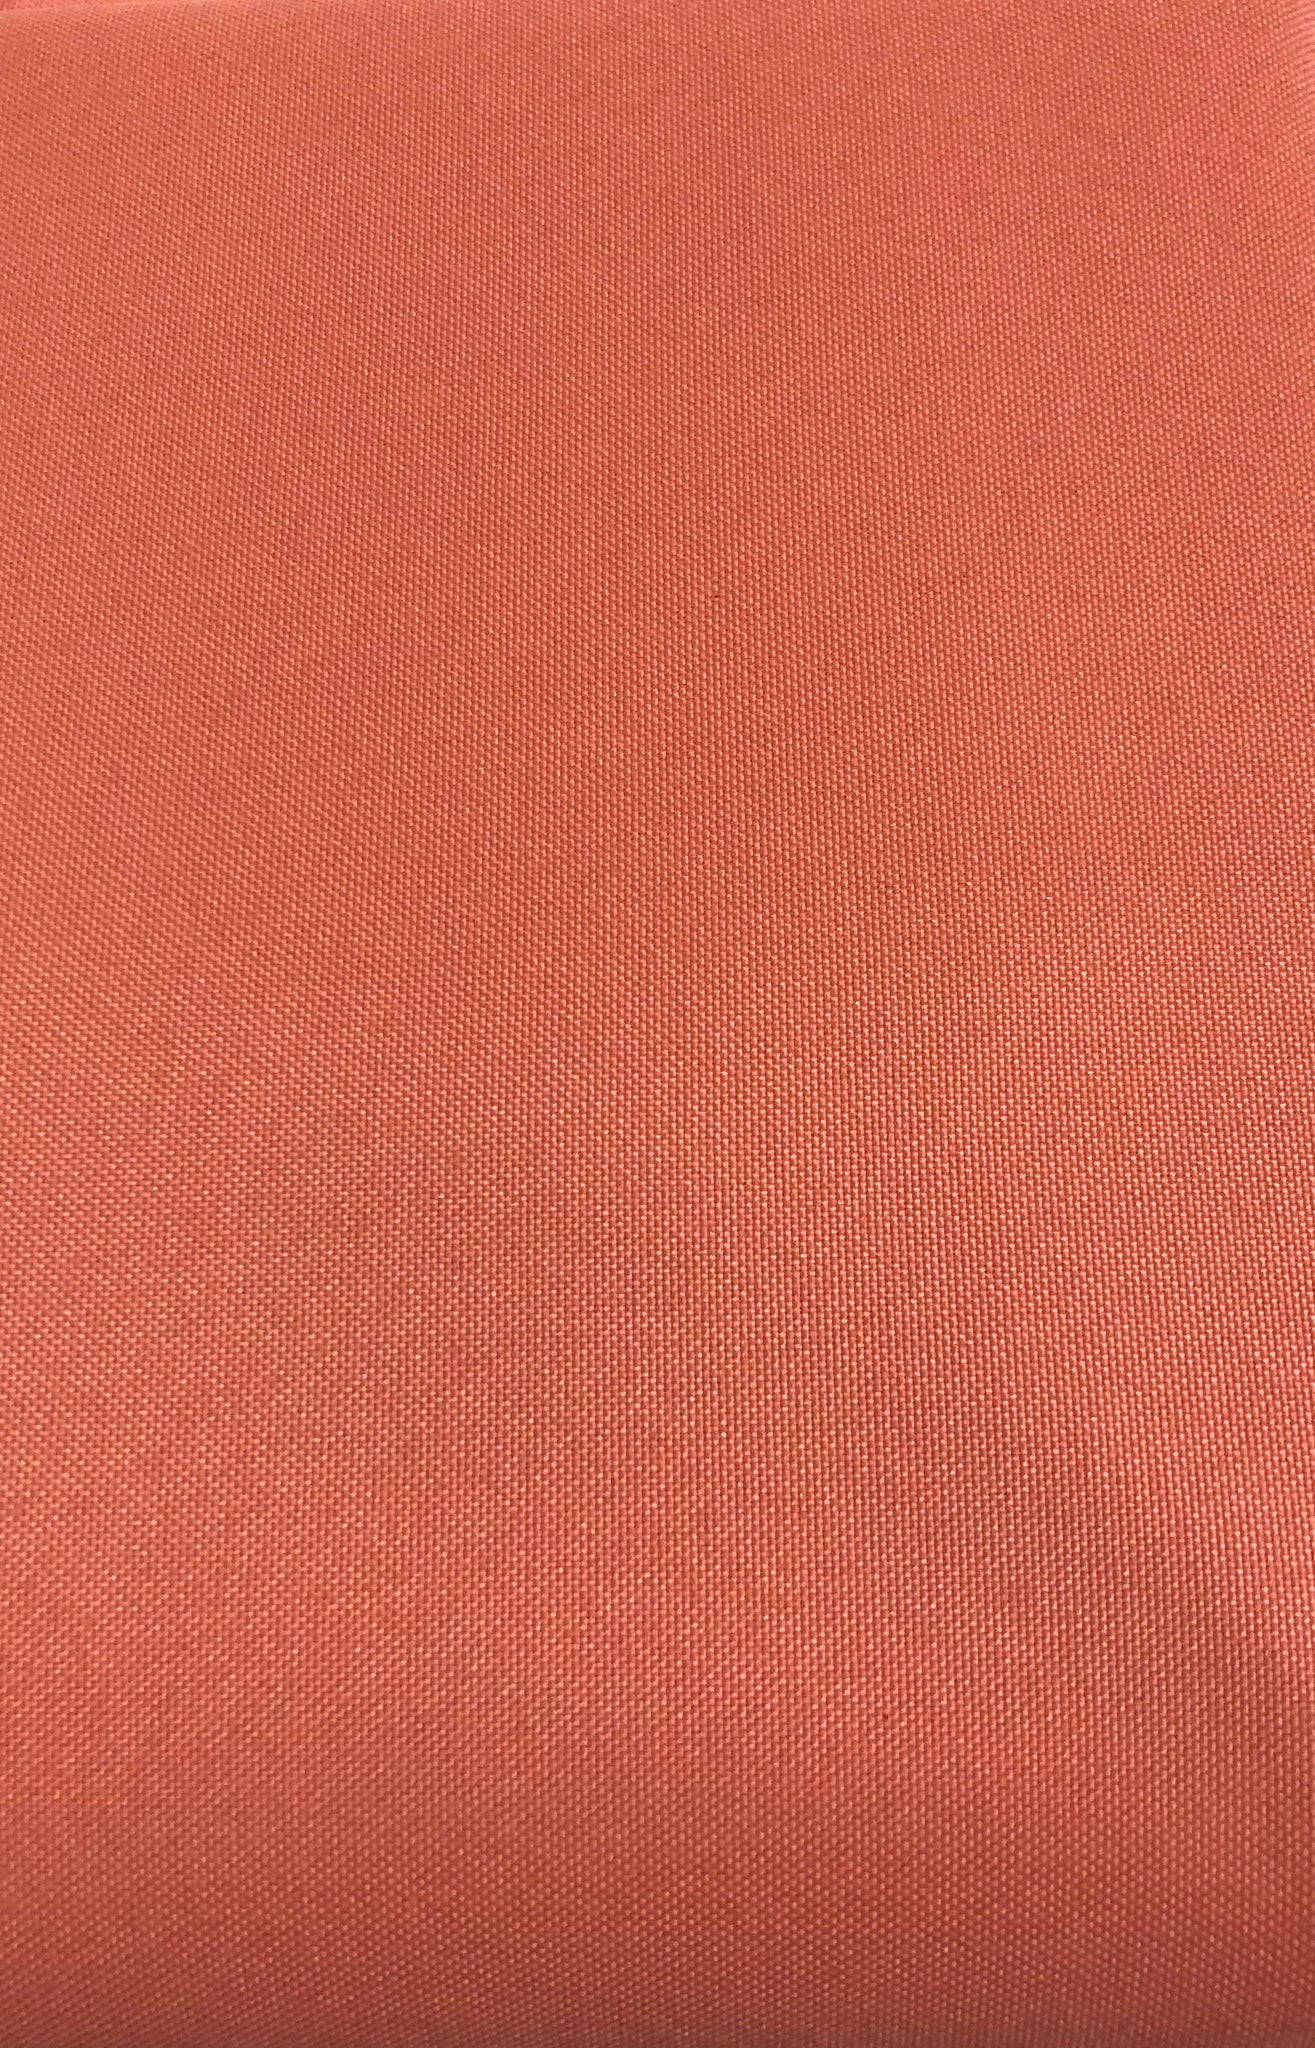 Table Cloth- Coral (No pattern)